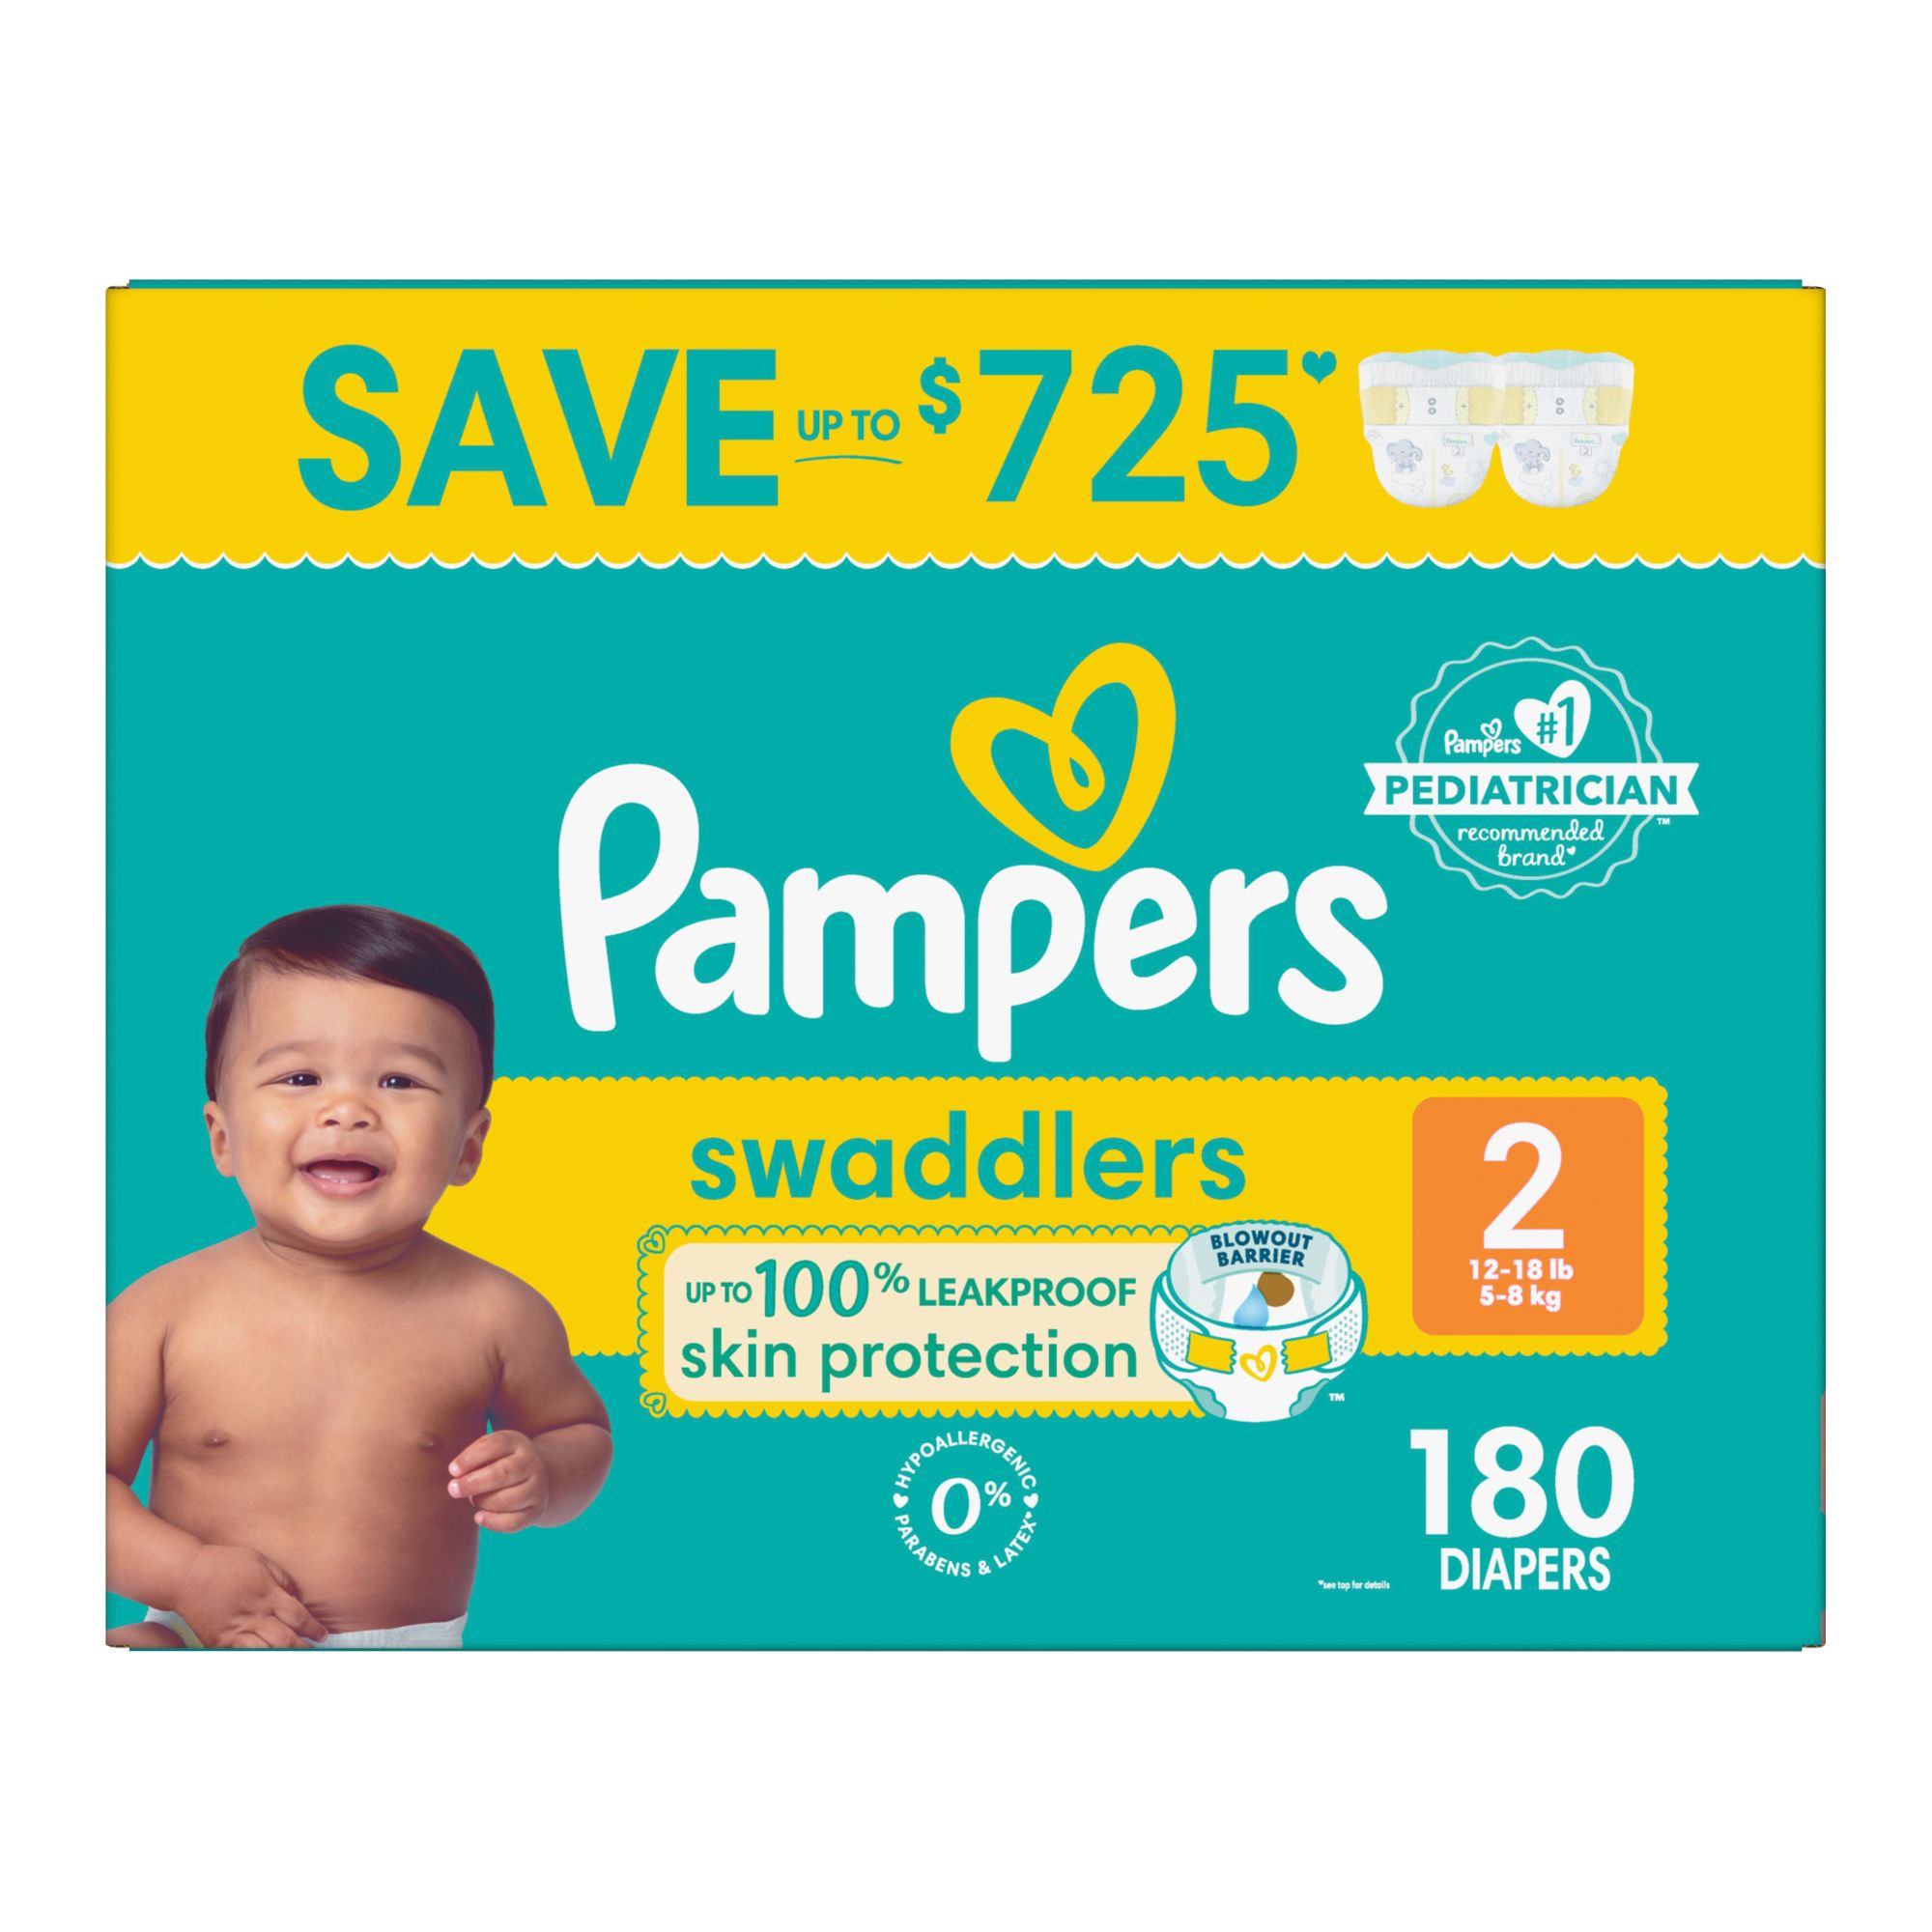 Pampers Swaddlers Diapers, Jumbo Pack, Sizes P-S, N, 1, 2, 3, 4, 5, and 6 